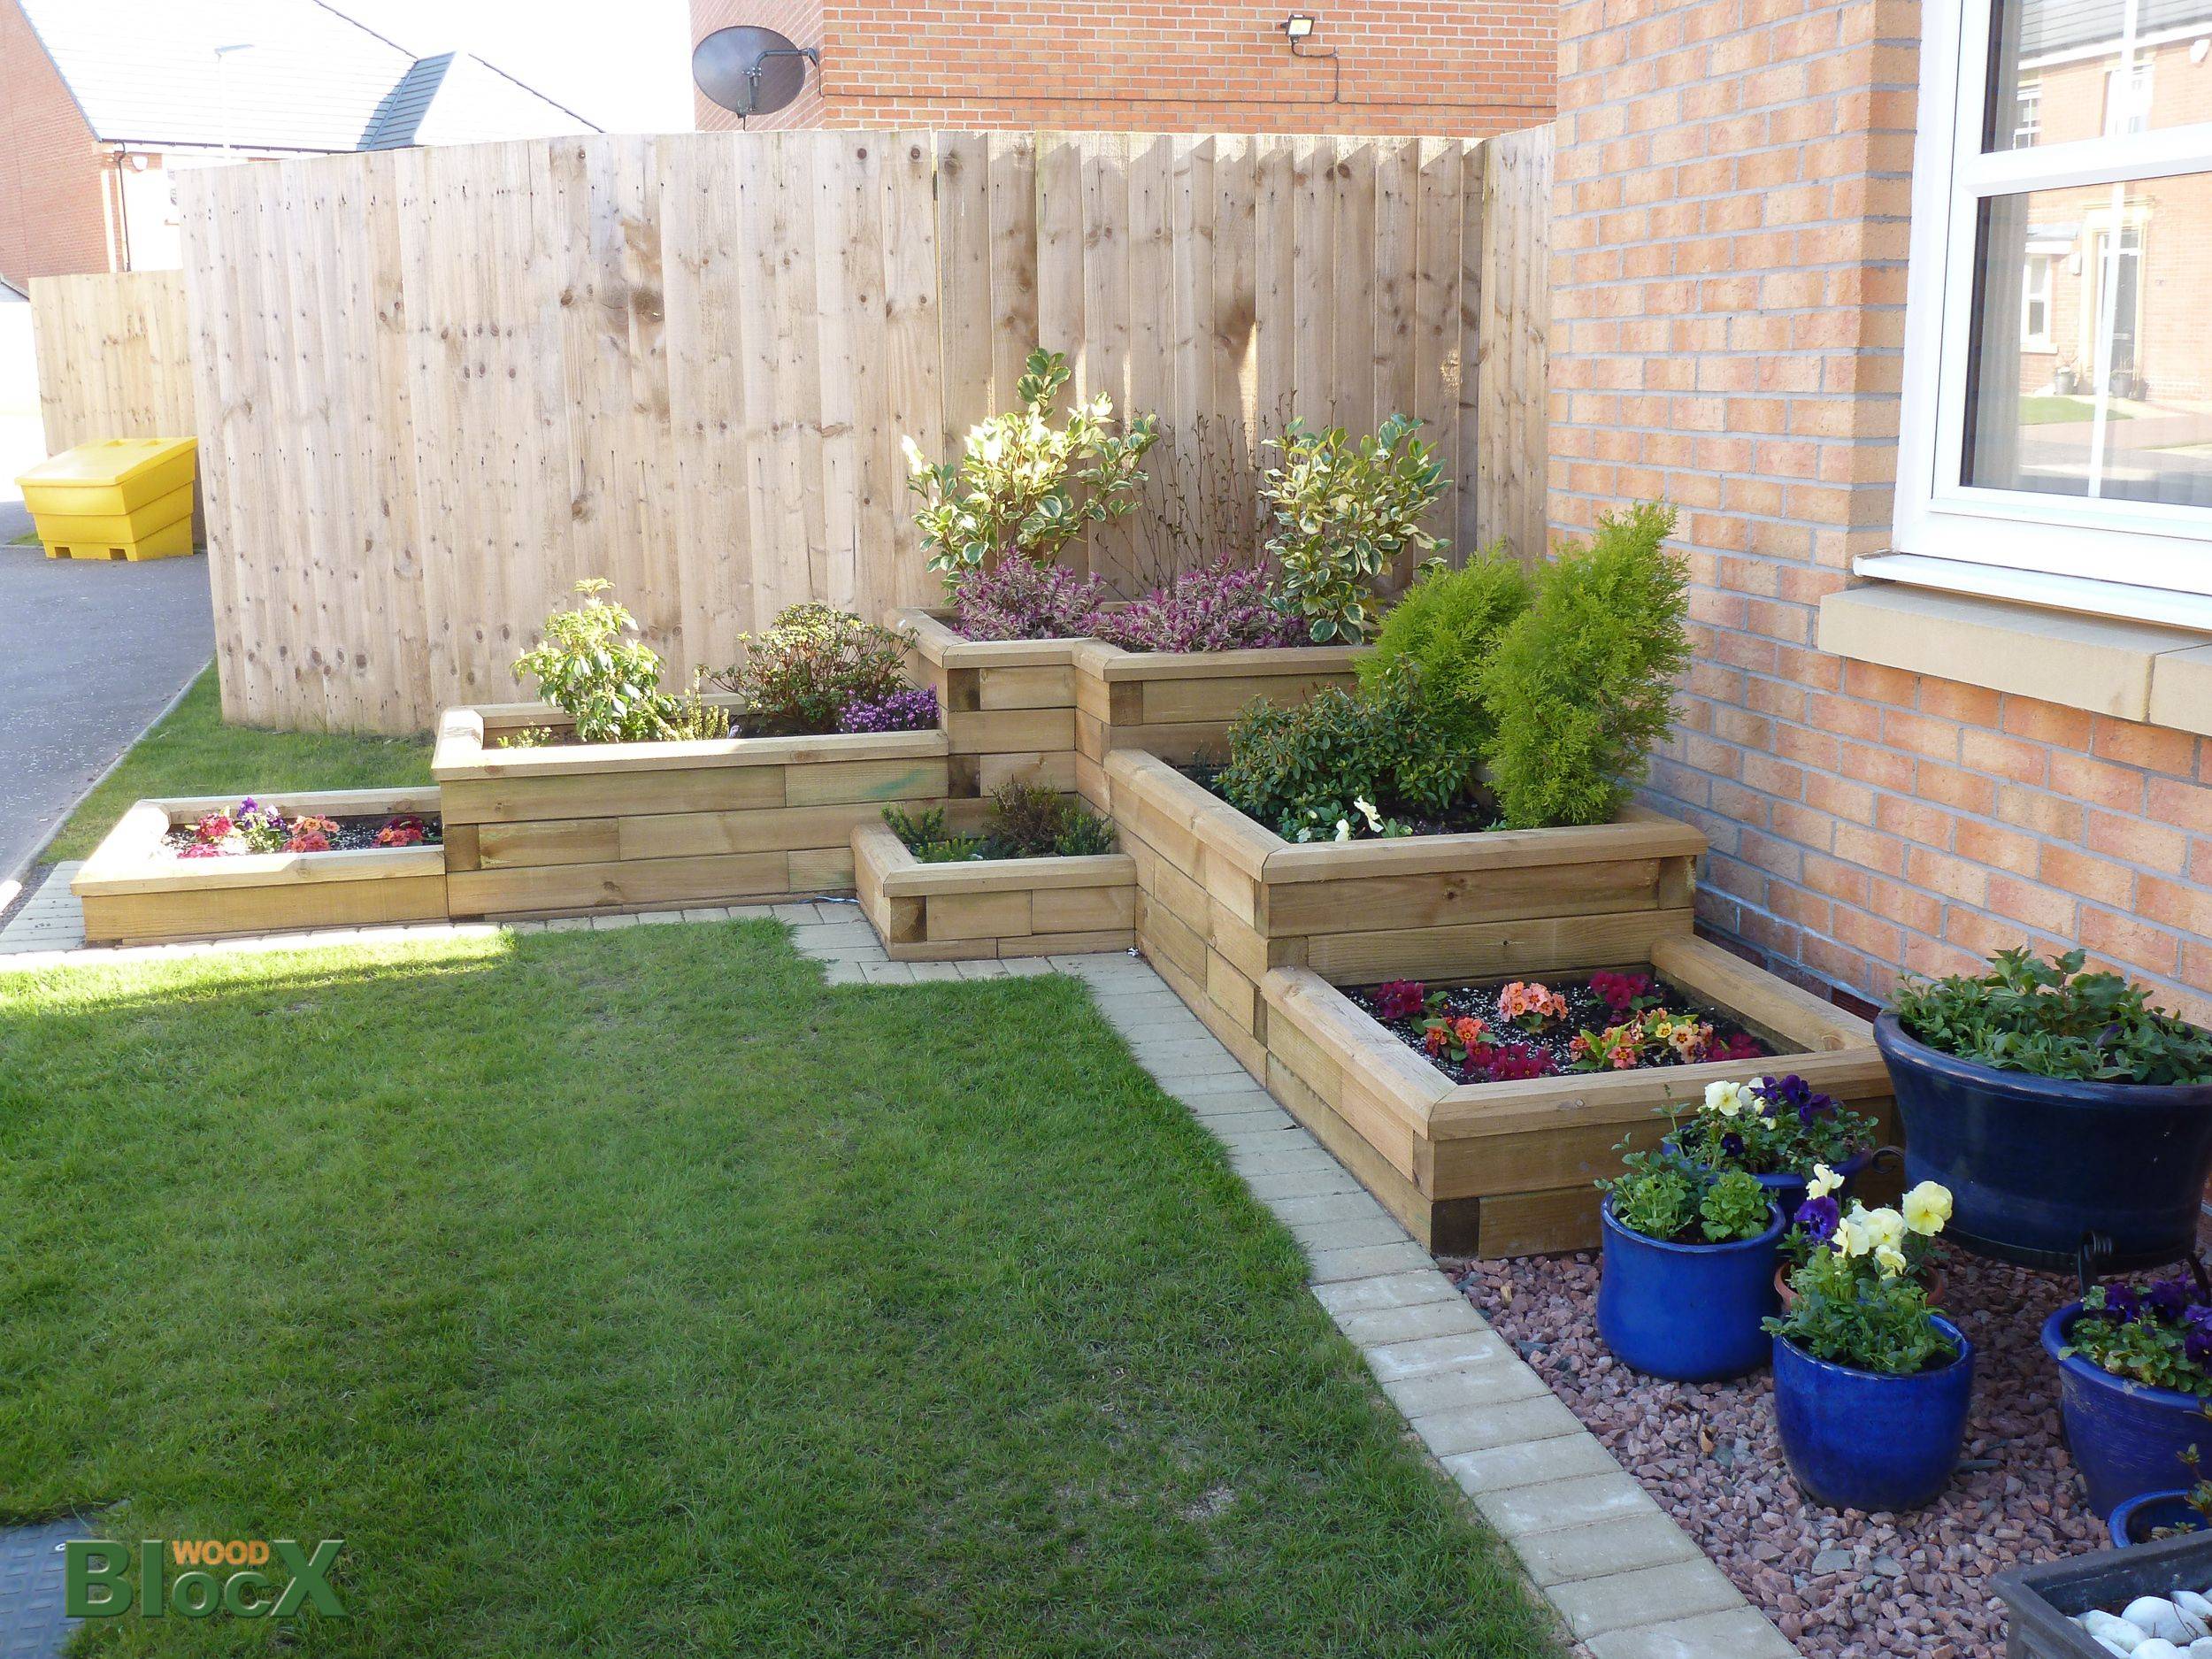 Most Amazing Raised Bed Gardens